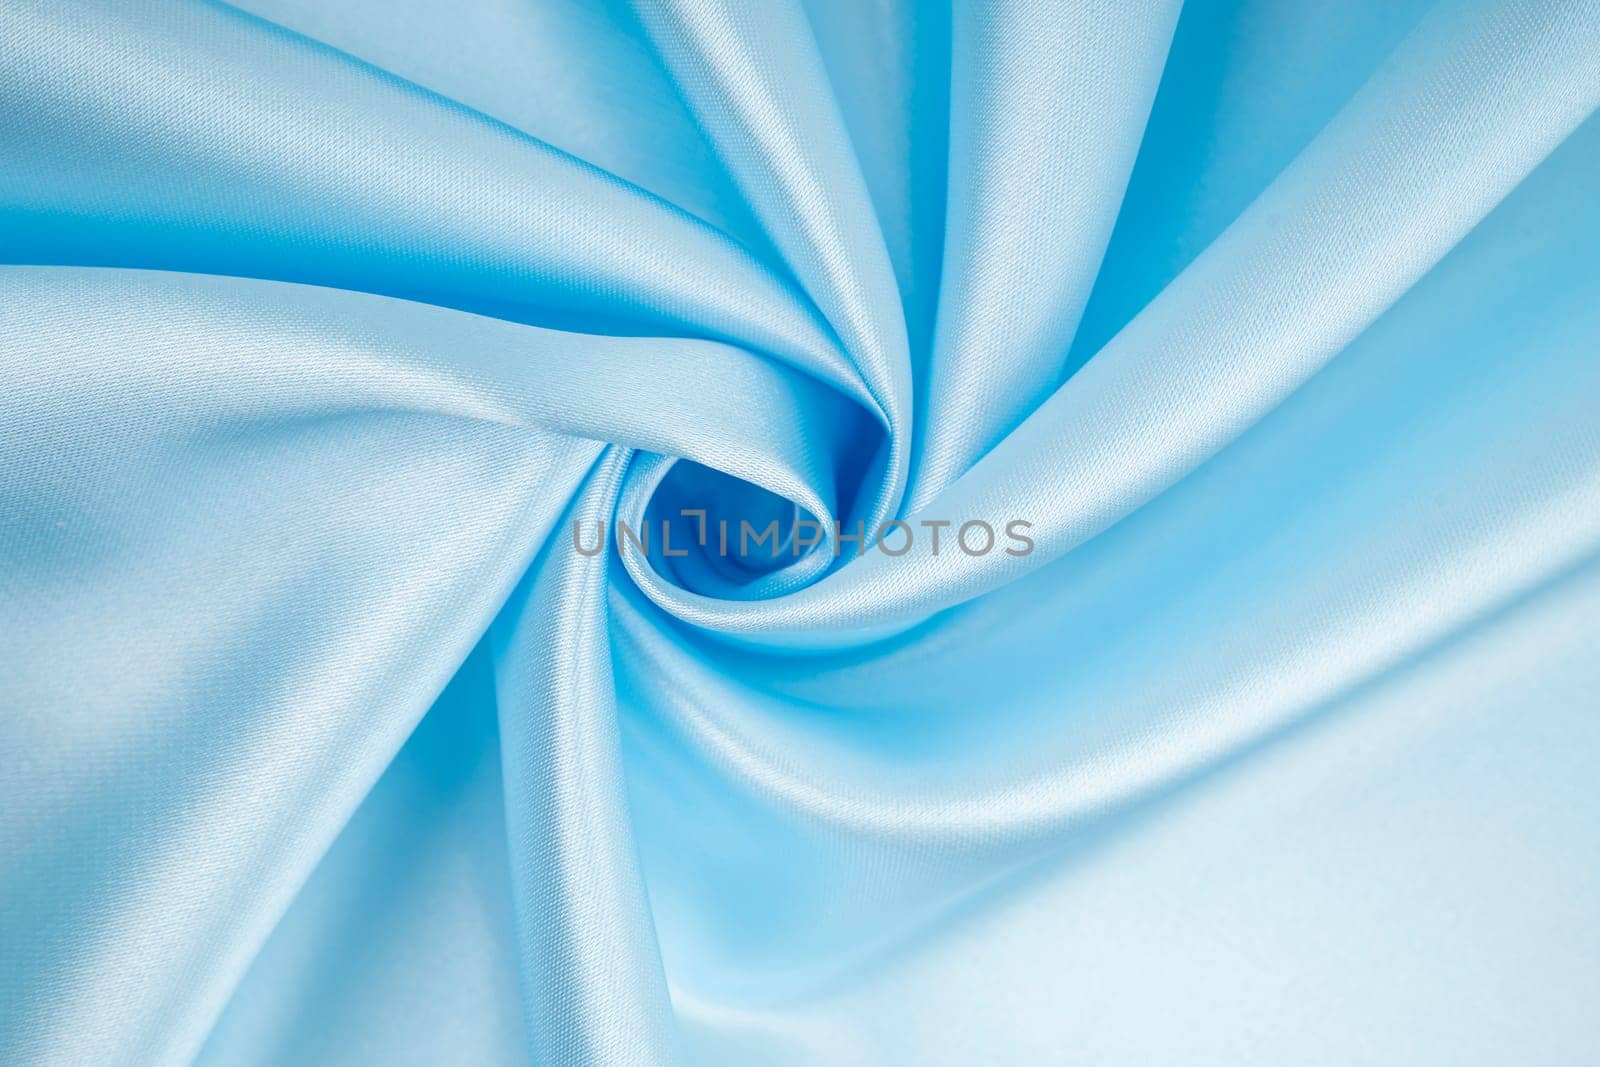 Soft folds and highlights of light blue silk. Whole background.